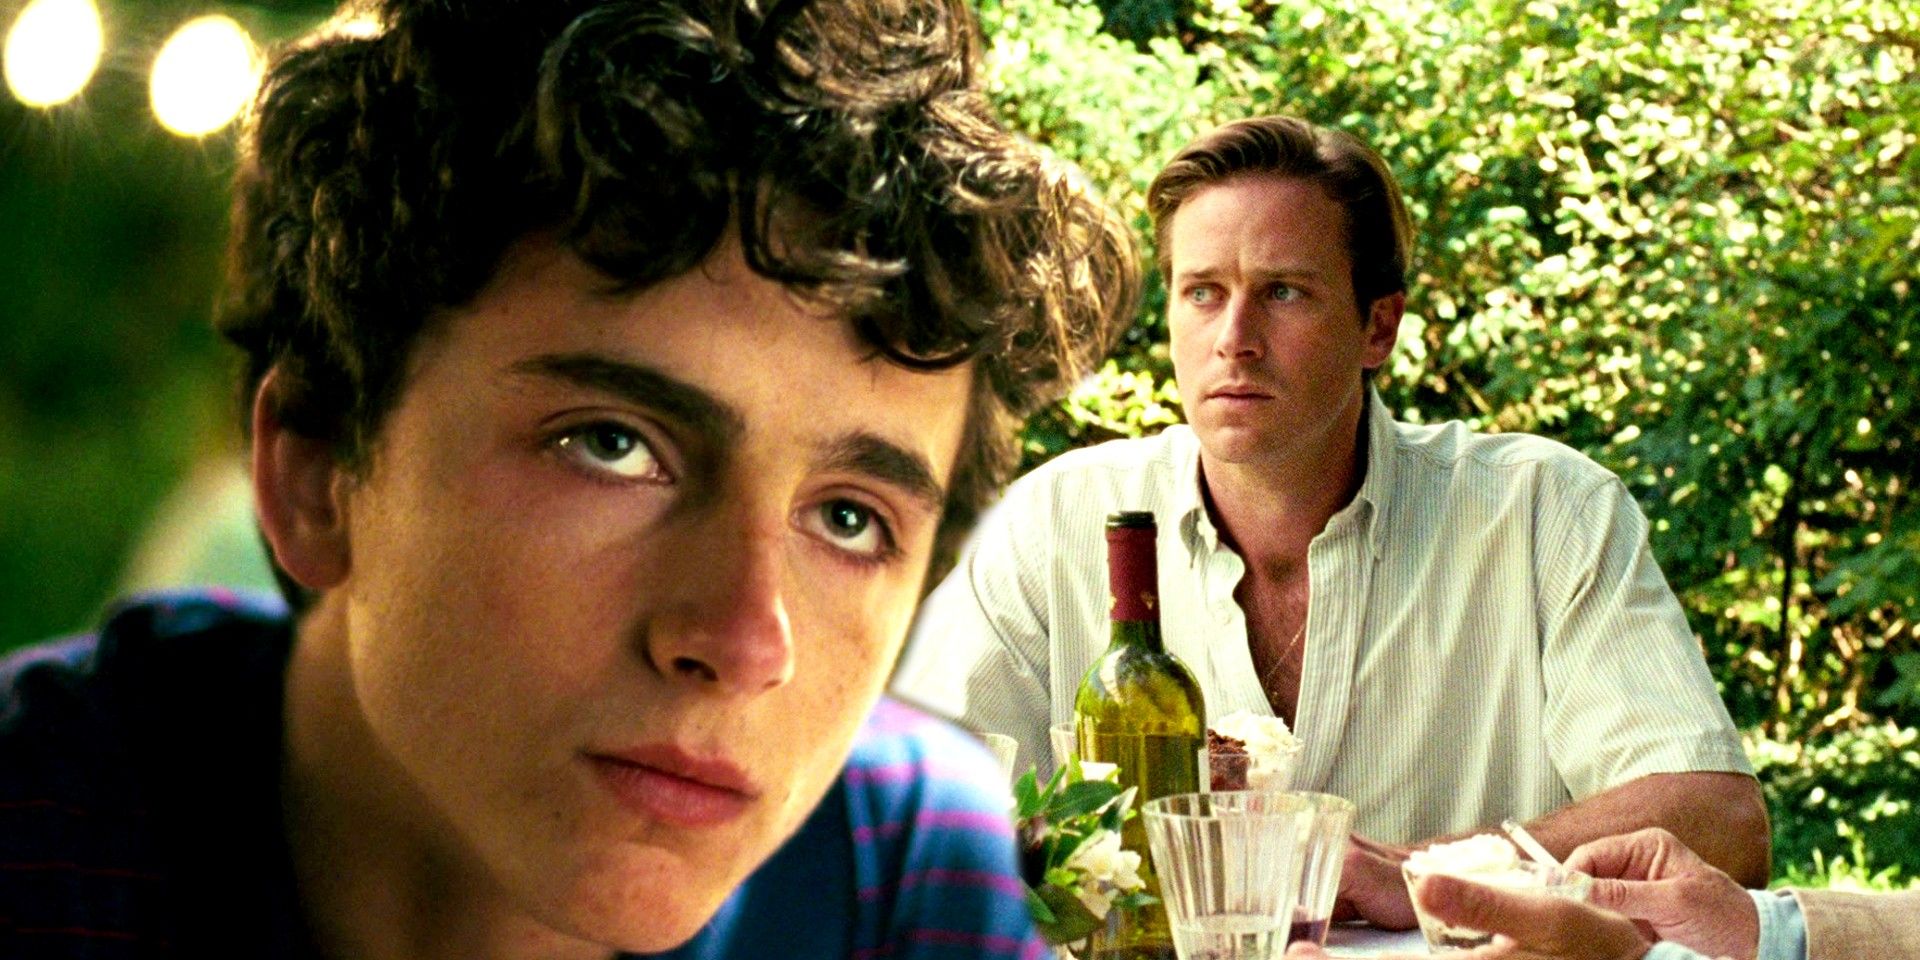 Timothée Chalamet and Armie Hammer in Call Me by Your Name